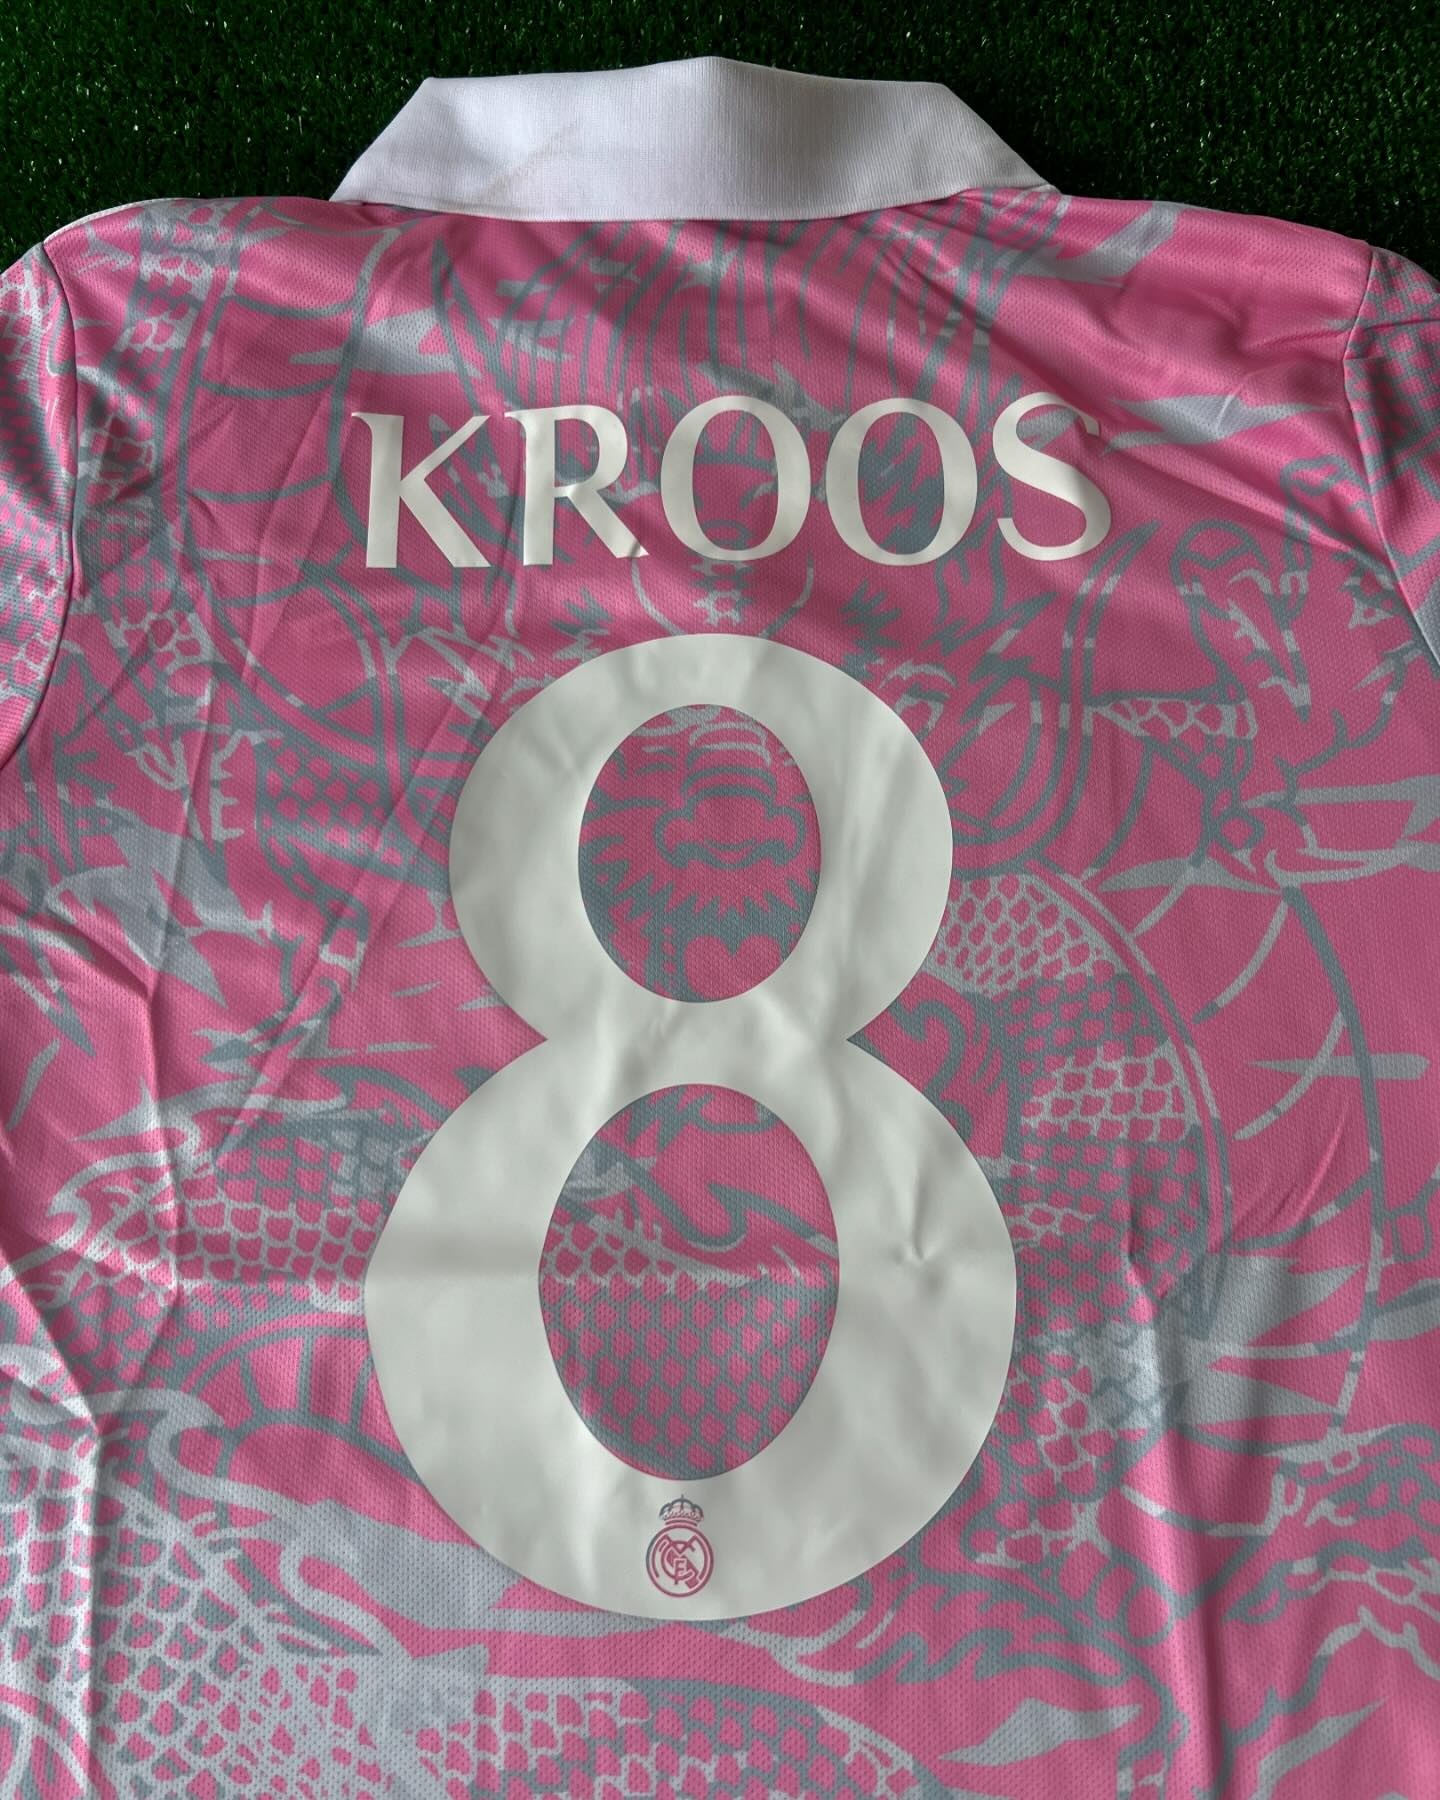 Kros Real Madrid Pink Dragon Special Jersey Maillot Trikot Maglia